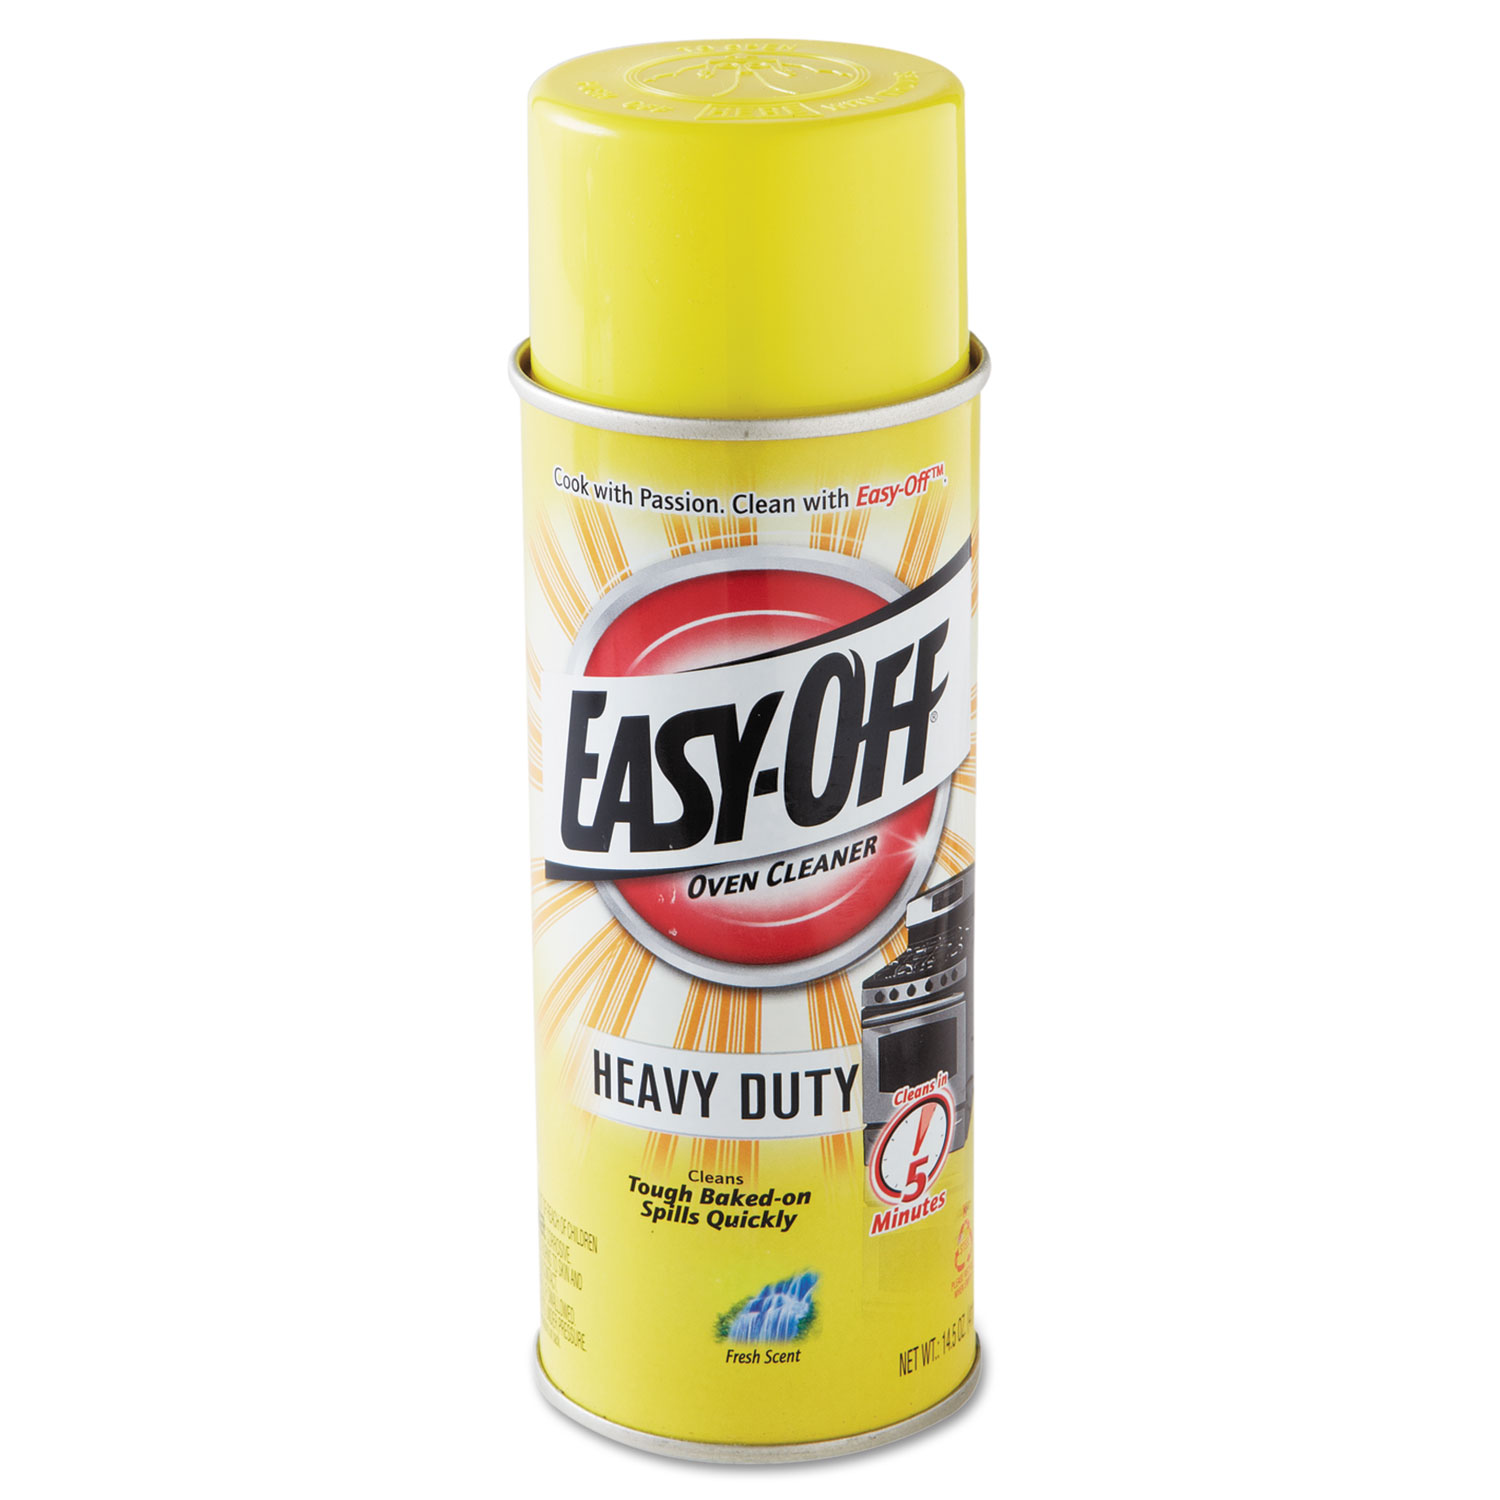 Easy-Off Heavy Duty Oven Cleaner Spray, Regular Scent, 14.5oz, , Removes Grease - image 1 of 7